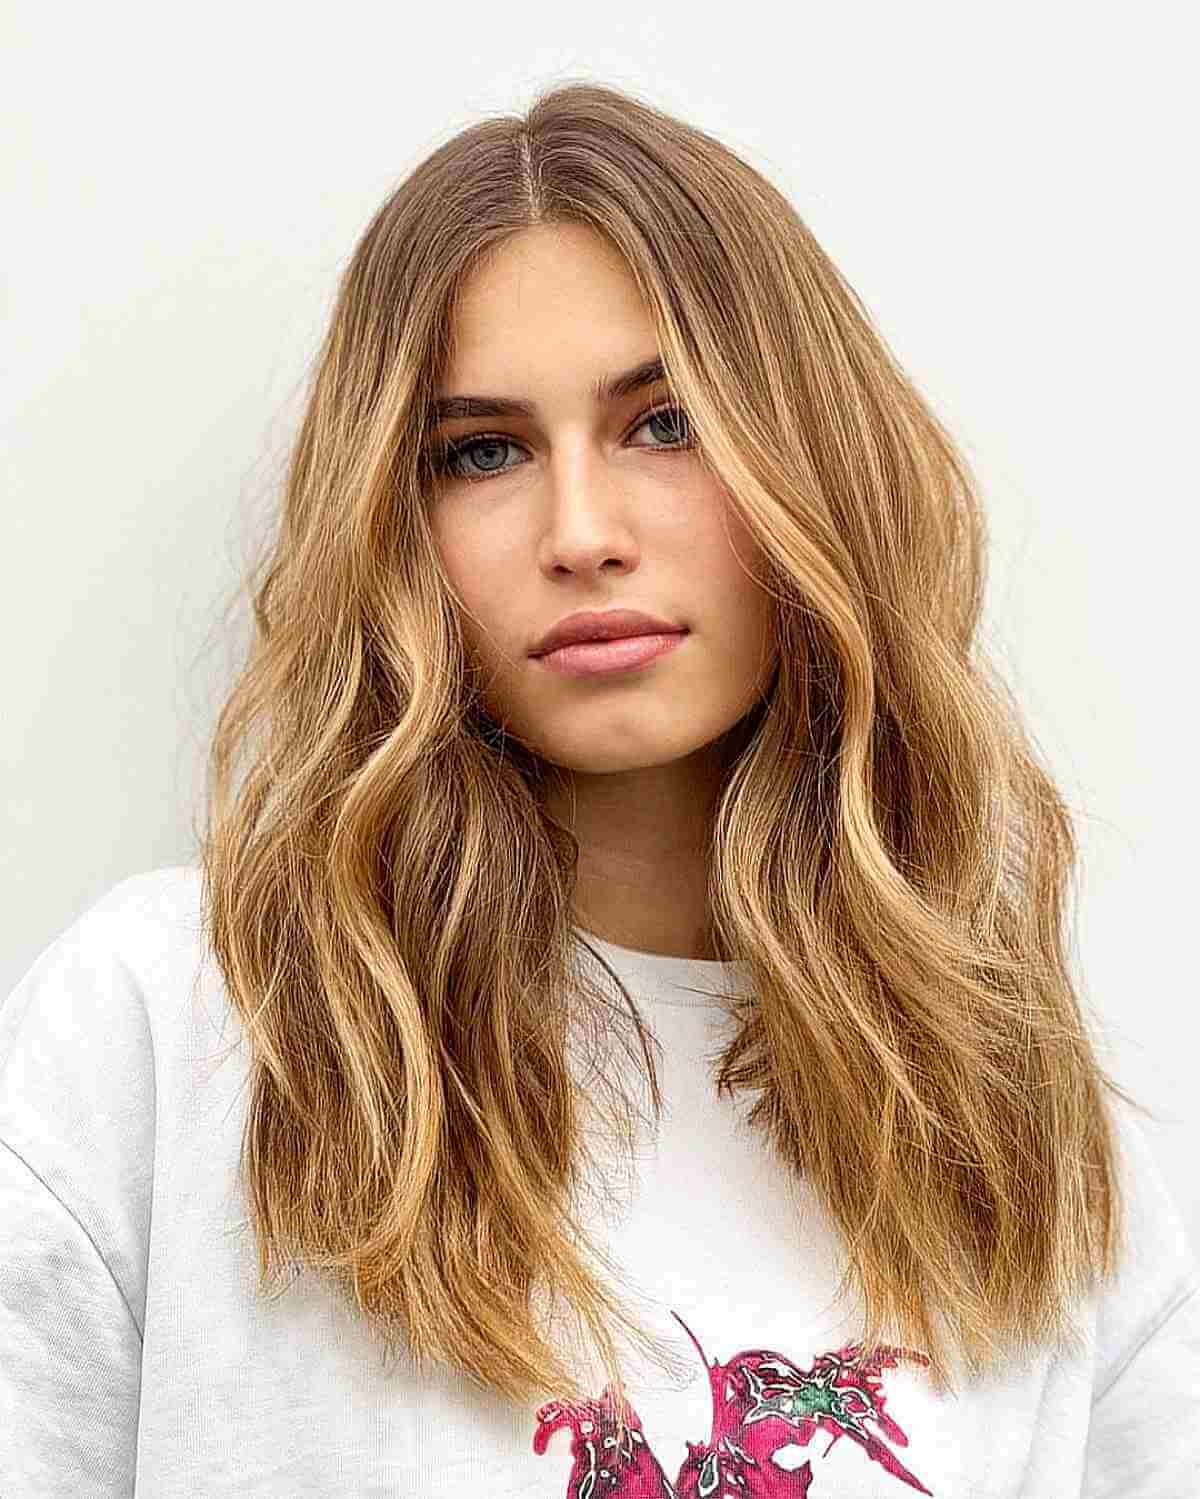 Middle-Parted Tousled Dark Blonde Mid-Length Hair